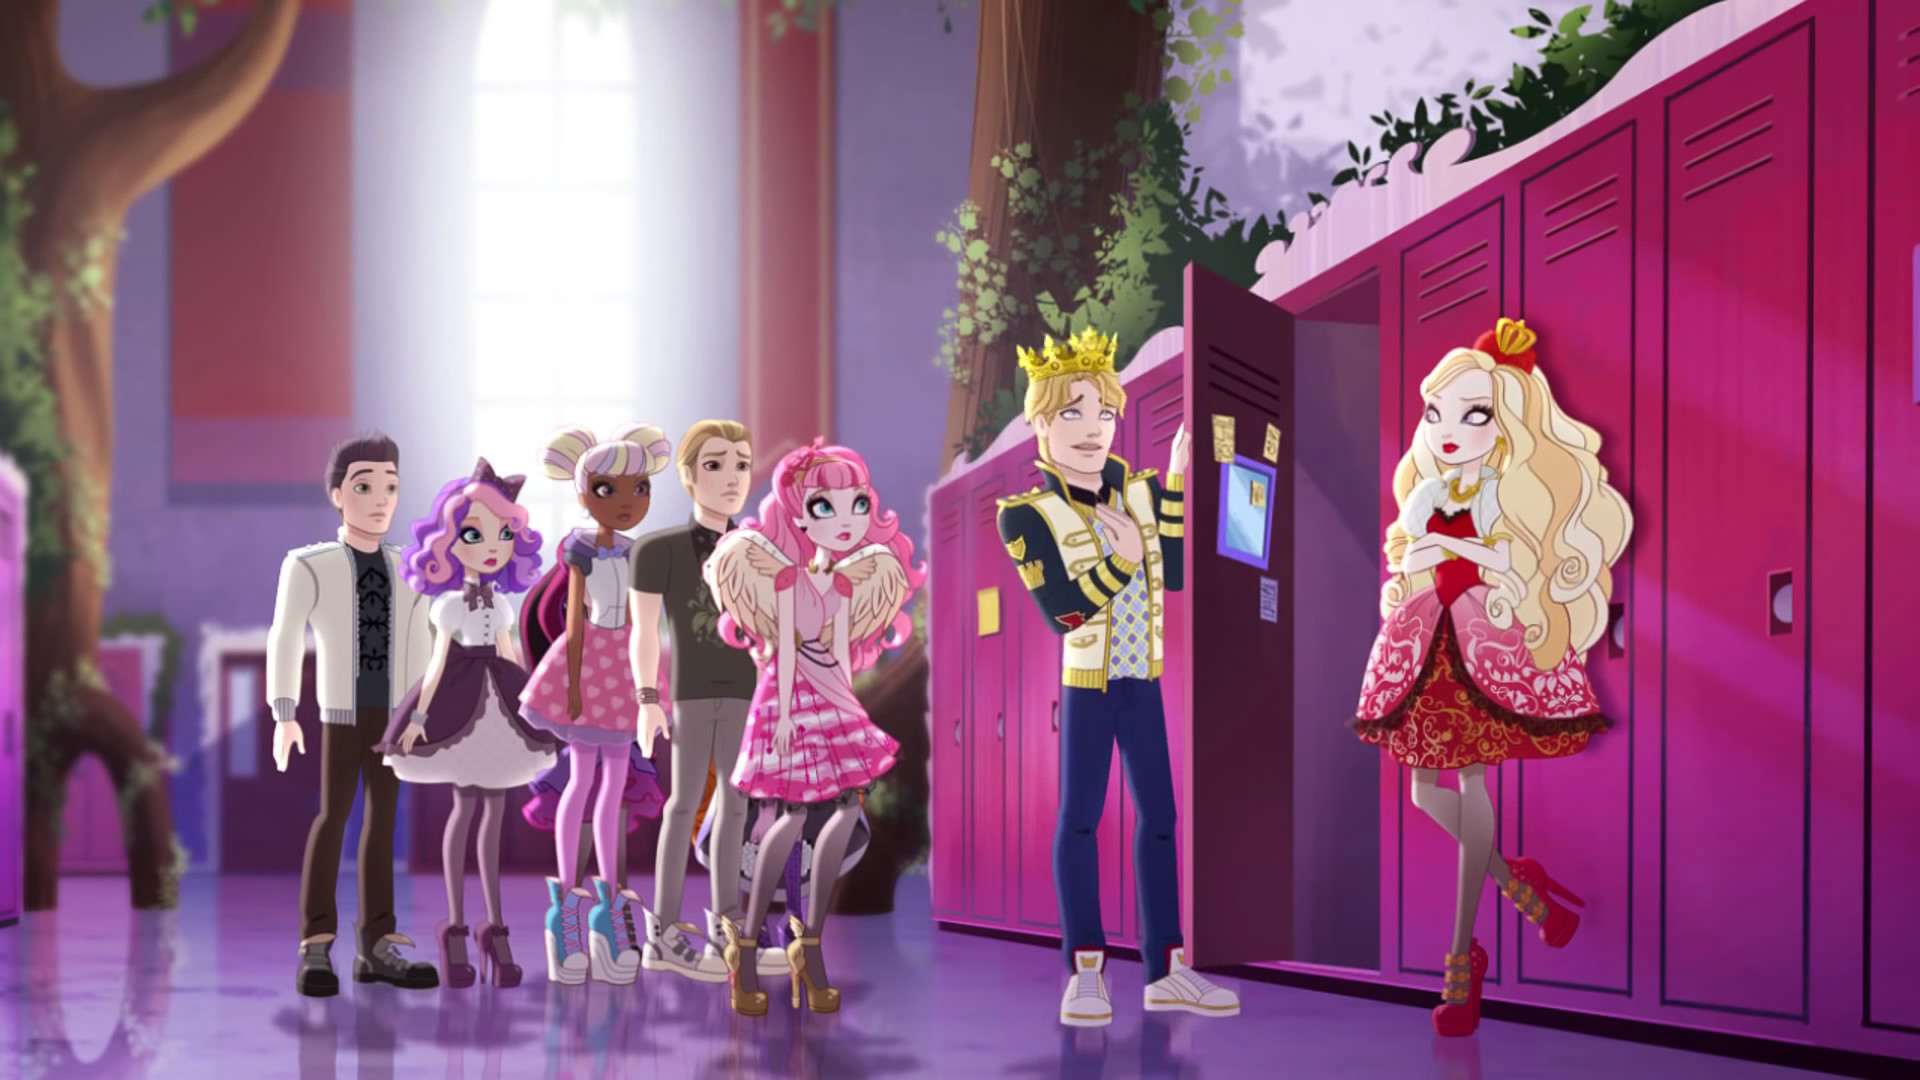 1920x1080 Spring Unsprung:Something's Wicked at Ever After High | Royal & Rebel Pedia  Wiki | FANDOM powered by Wikia